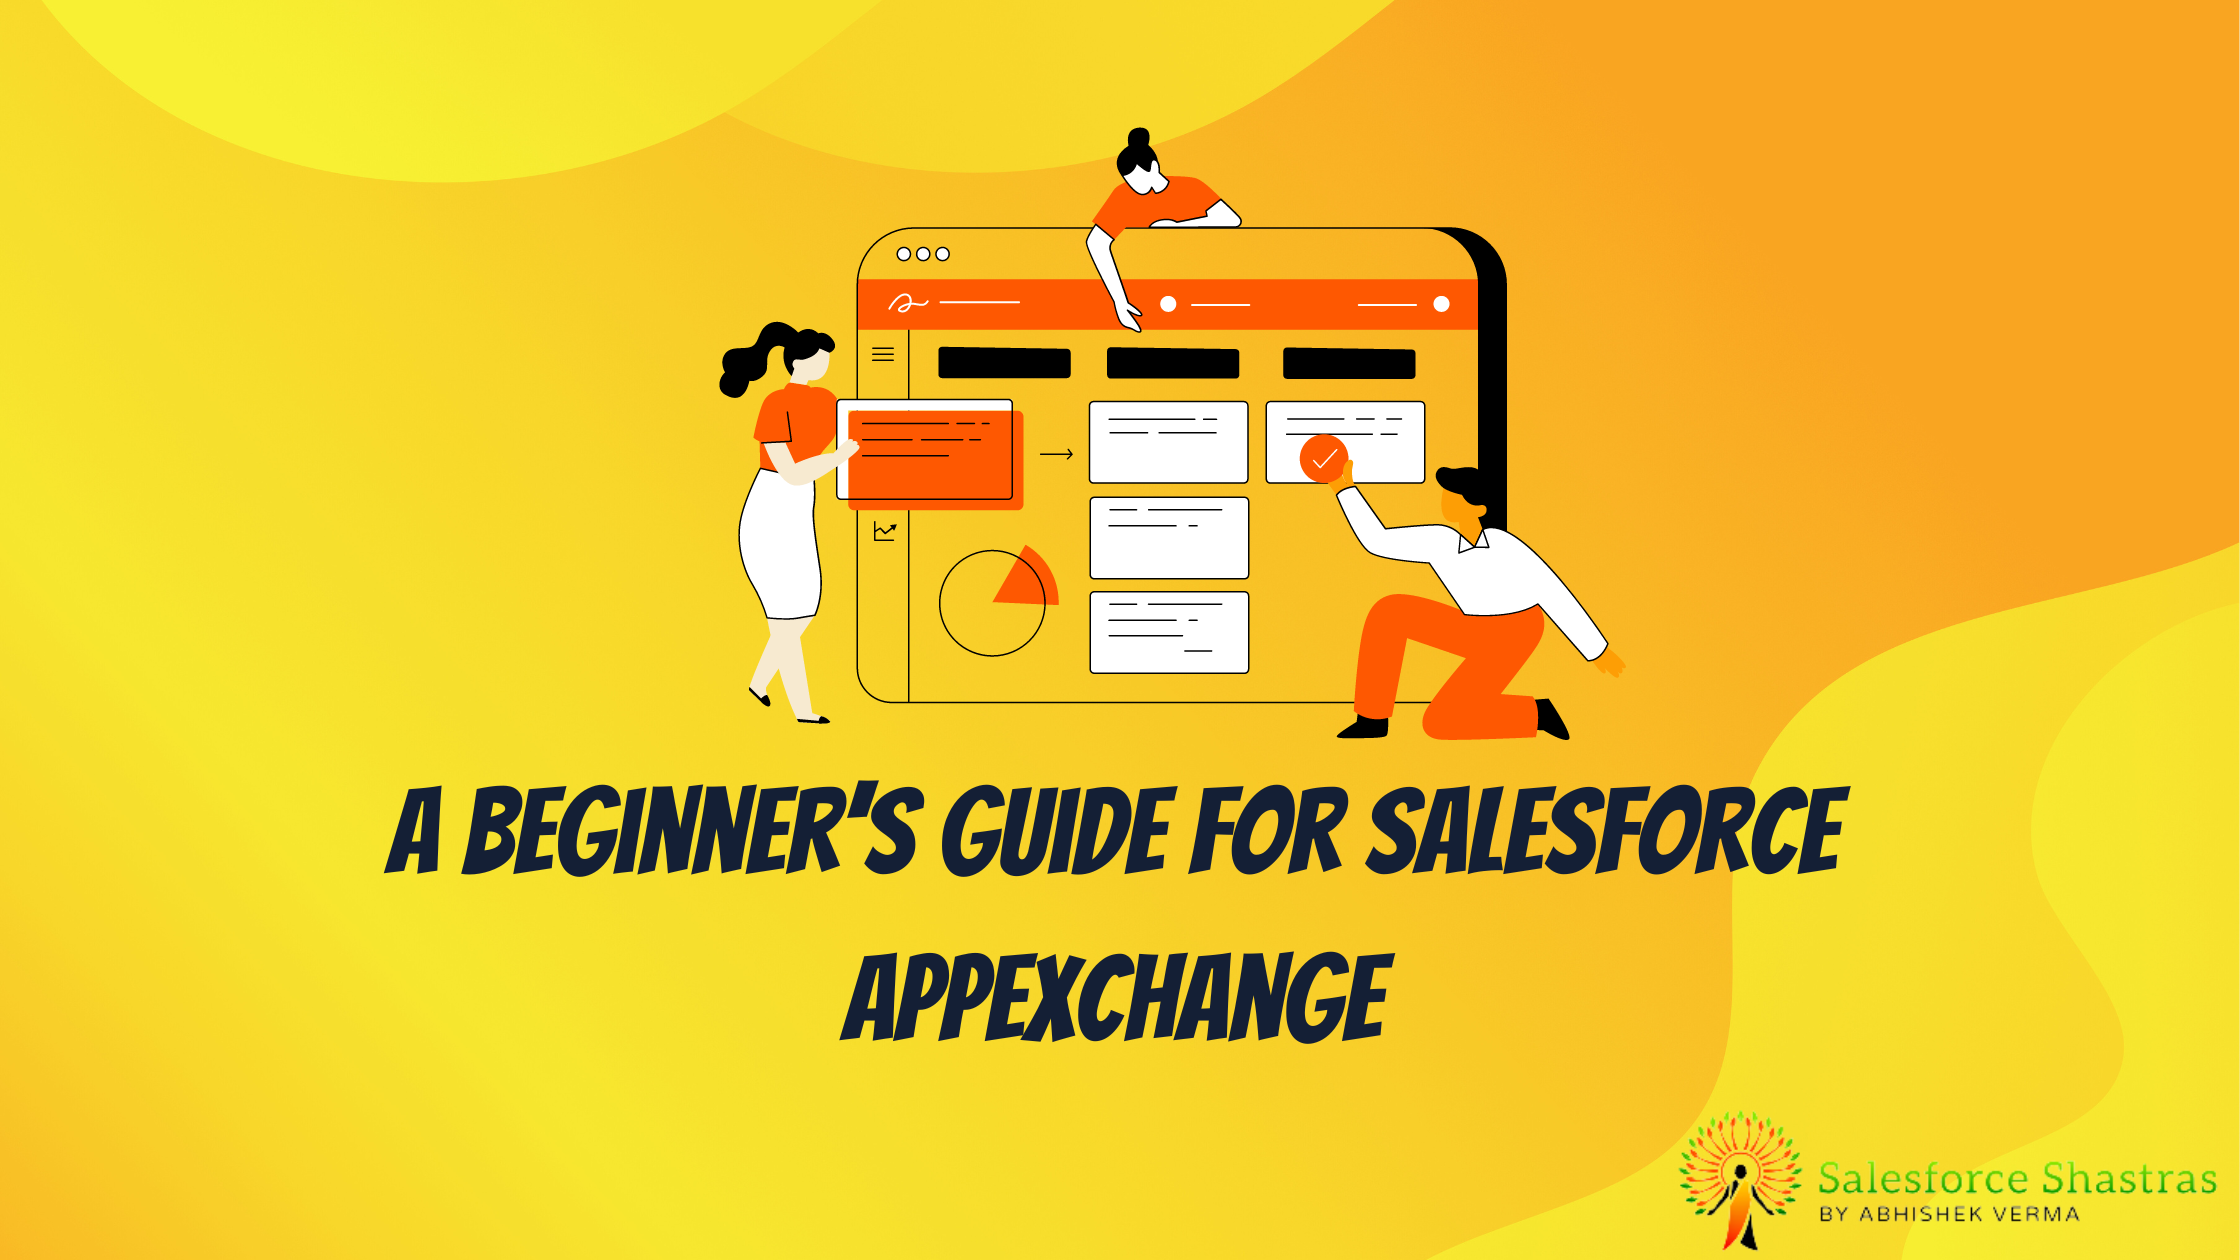 A Beginner’s Guide for Salesforce AppExchange